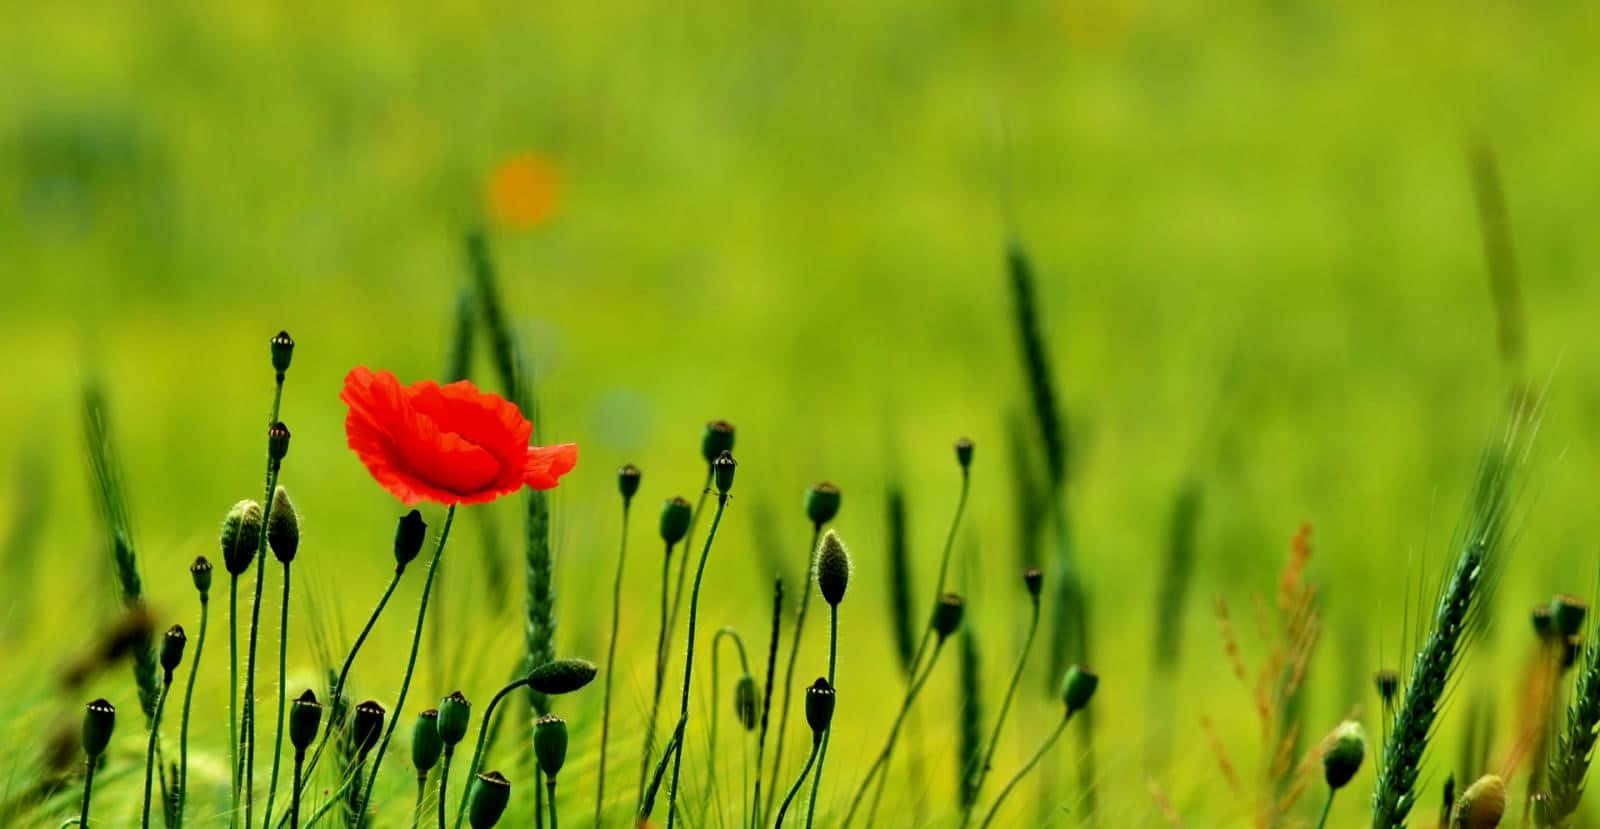 "Watch the vibrant beauty of poppies bloom in a field"